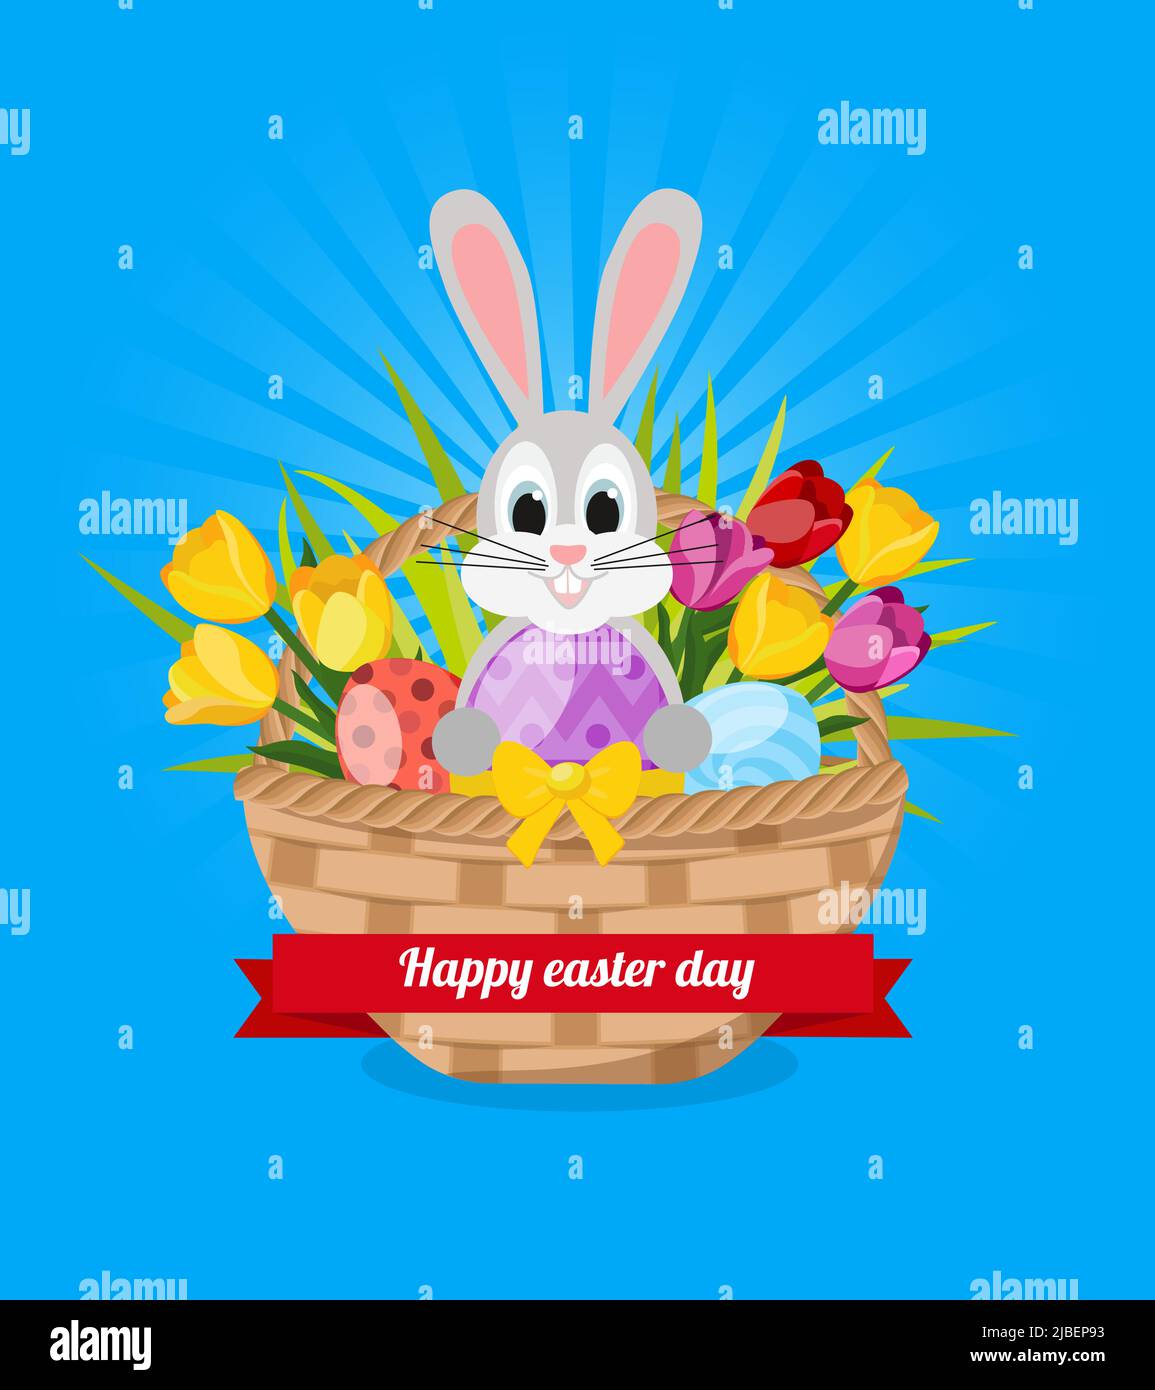 Happy easter design with cheerful bunny tulips painted eggs in basket rays on blue background vector illustration Stock Vector